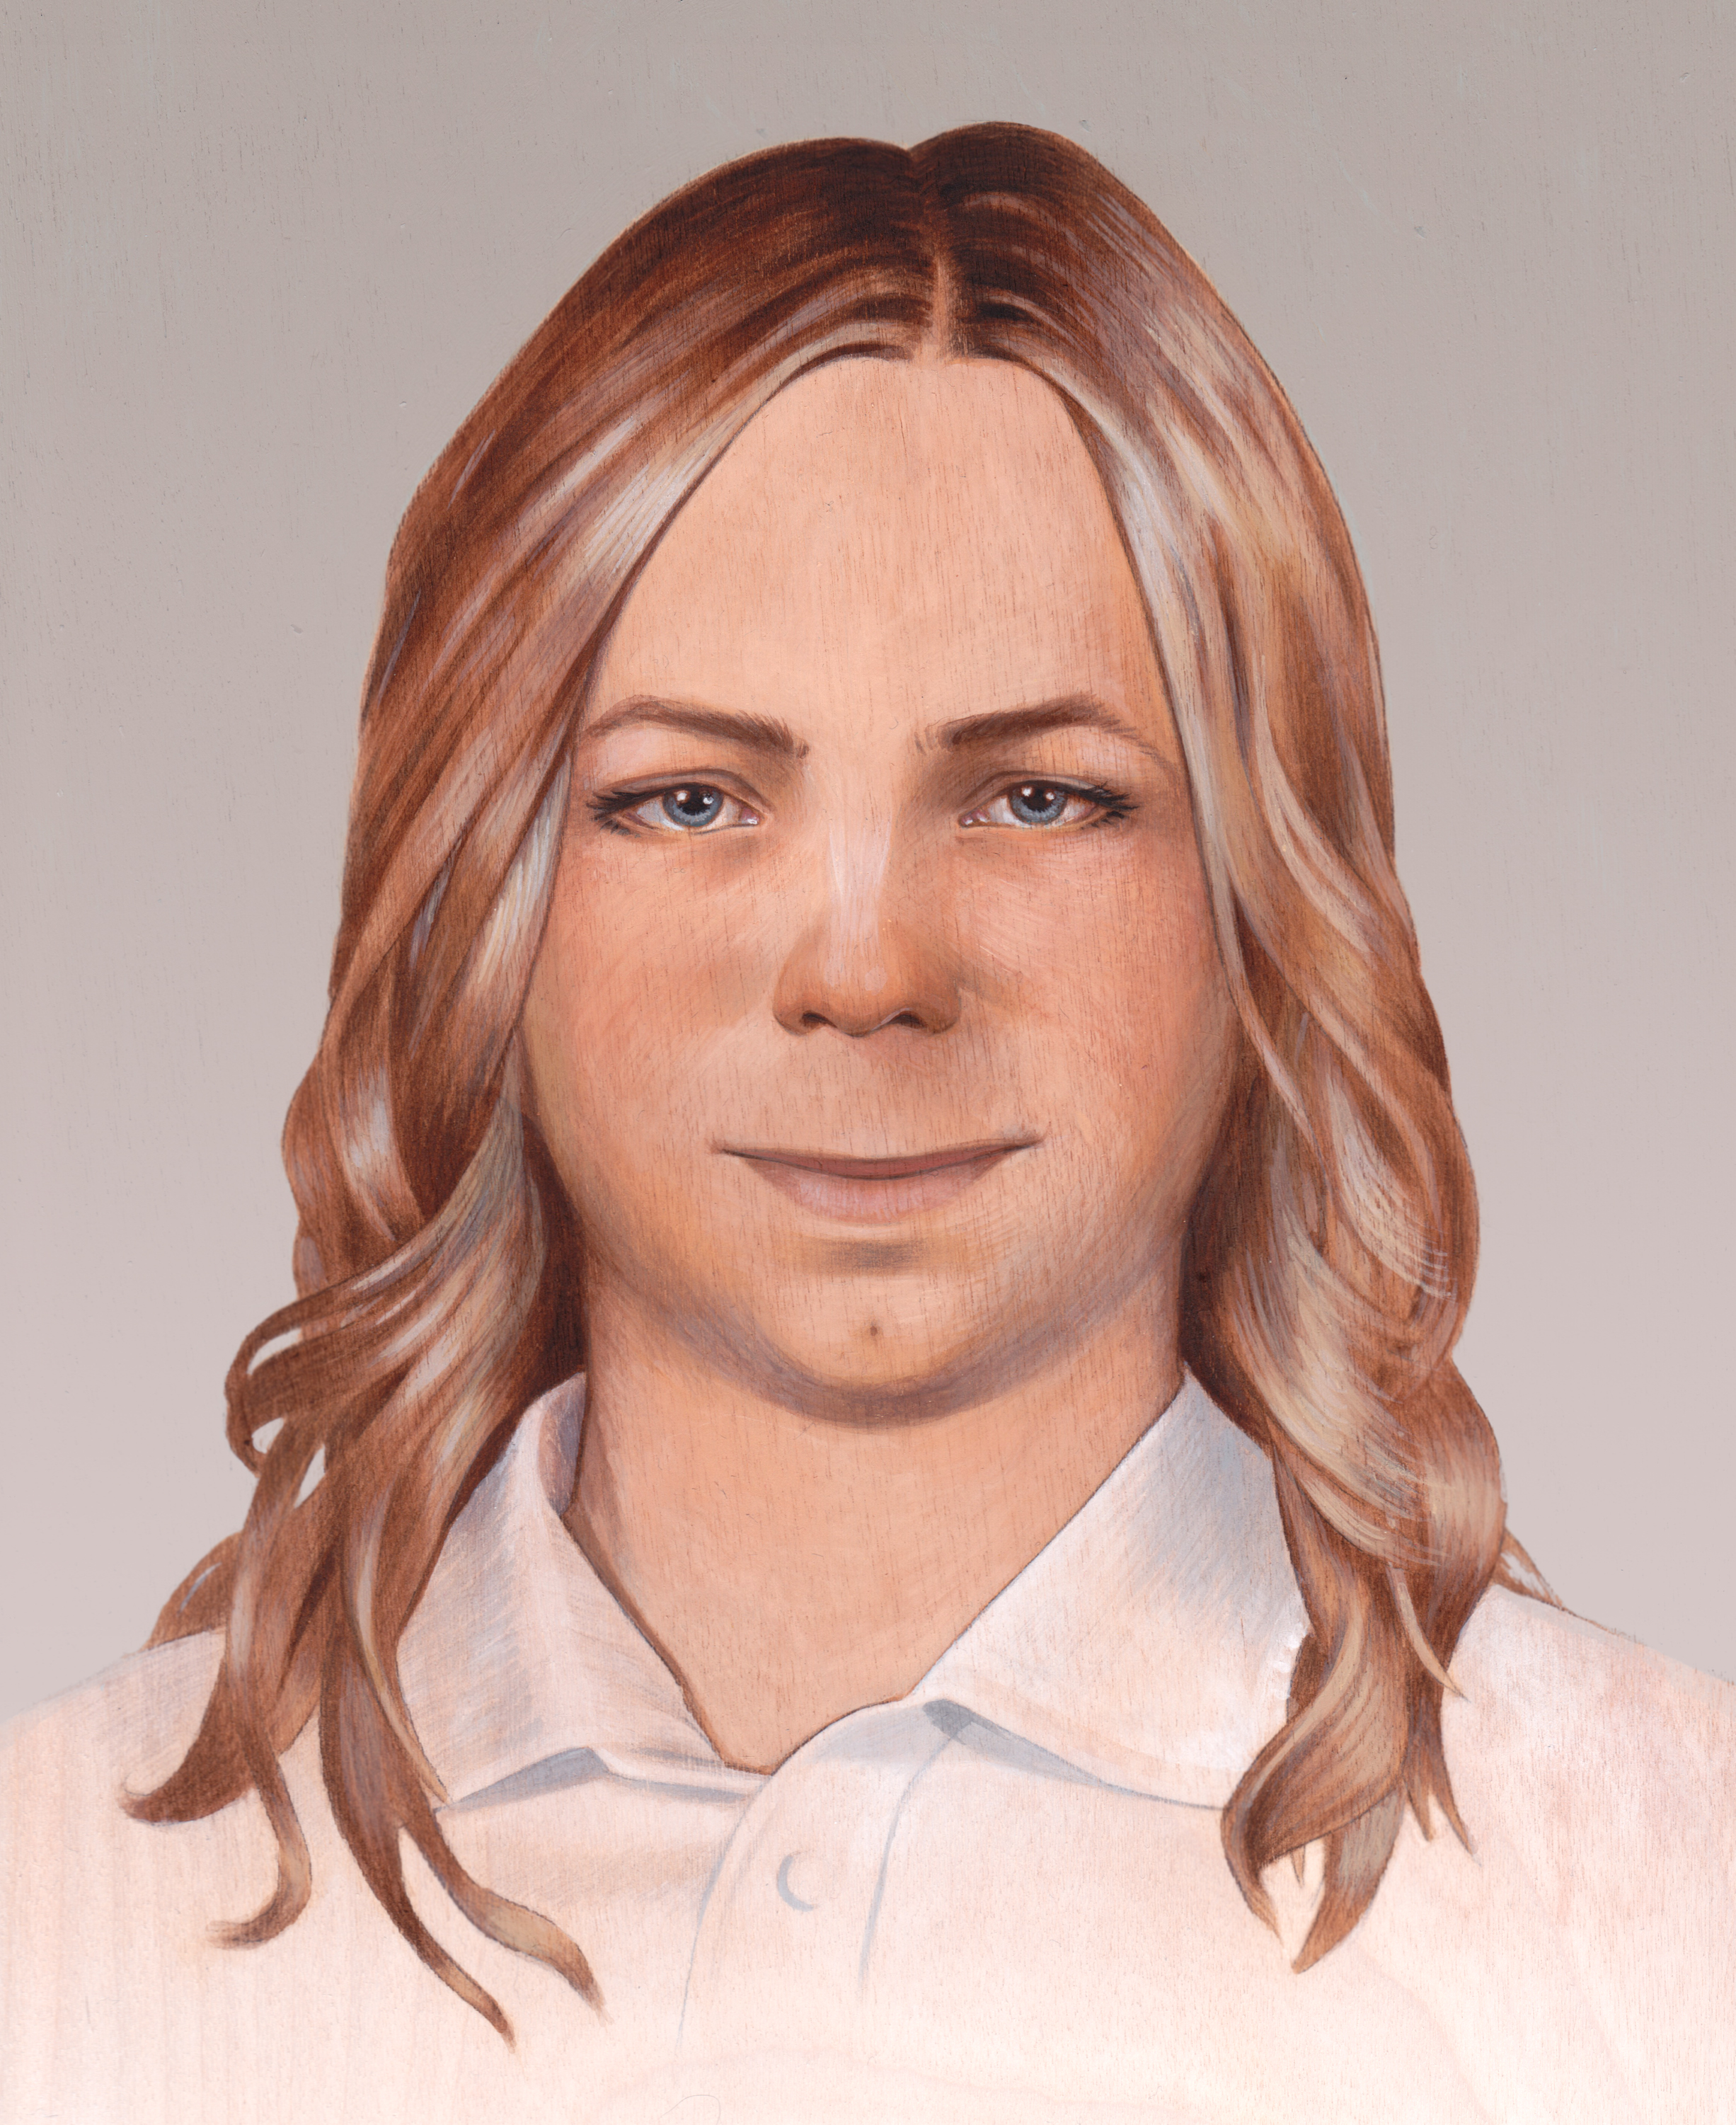 Artist rendering of how Chelsea Manning sees herself. (Alicia Neal—Chelsea Manning Support Network)